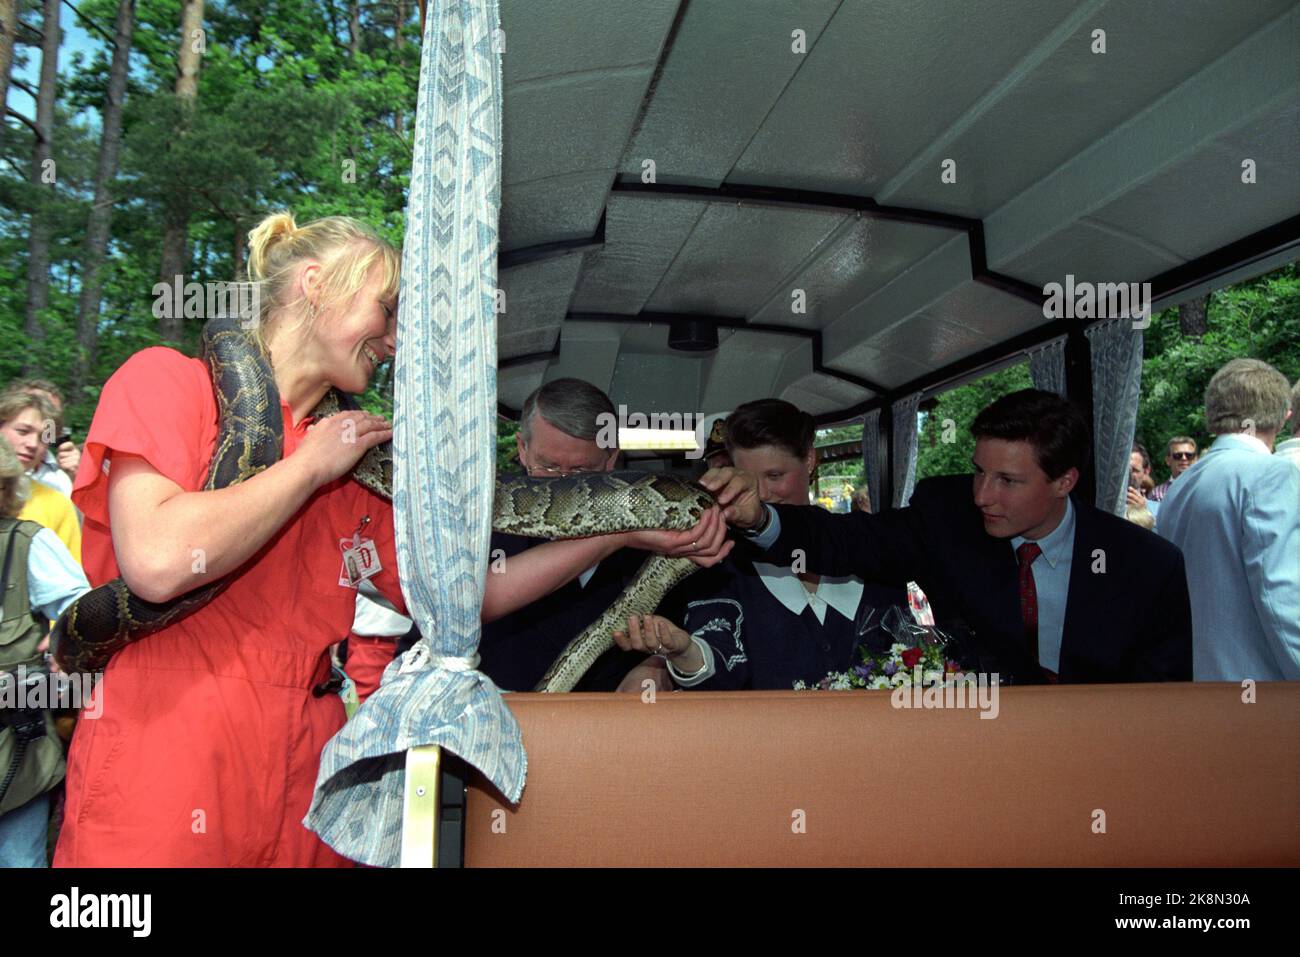 Kristiansand 19910627 - June 1991. The royal family in Kristiansand. Visiting the Zoo. Here they greet a python hose, tiger python. Crown Prince Haakon and Princess Märtha Louise clap the snake. Photo: Lise Åserud / NTB Stock Photo